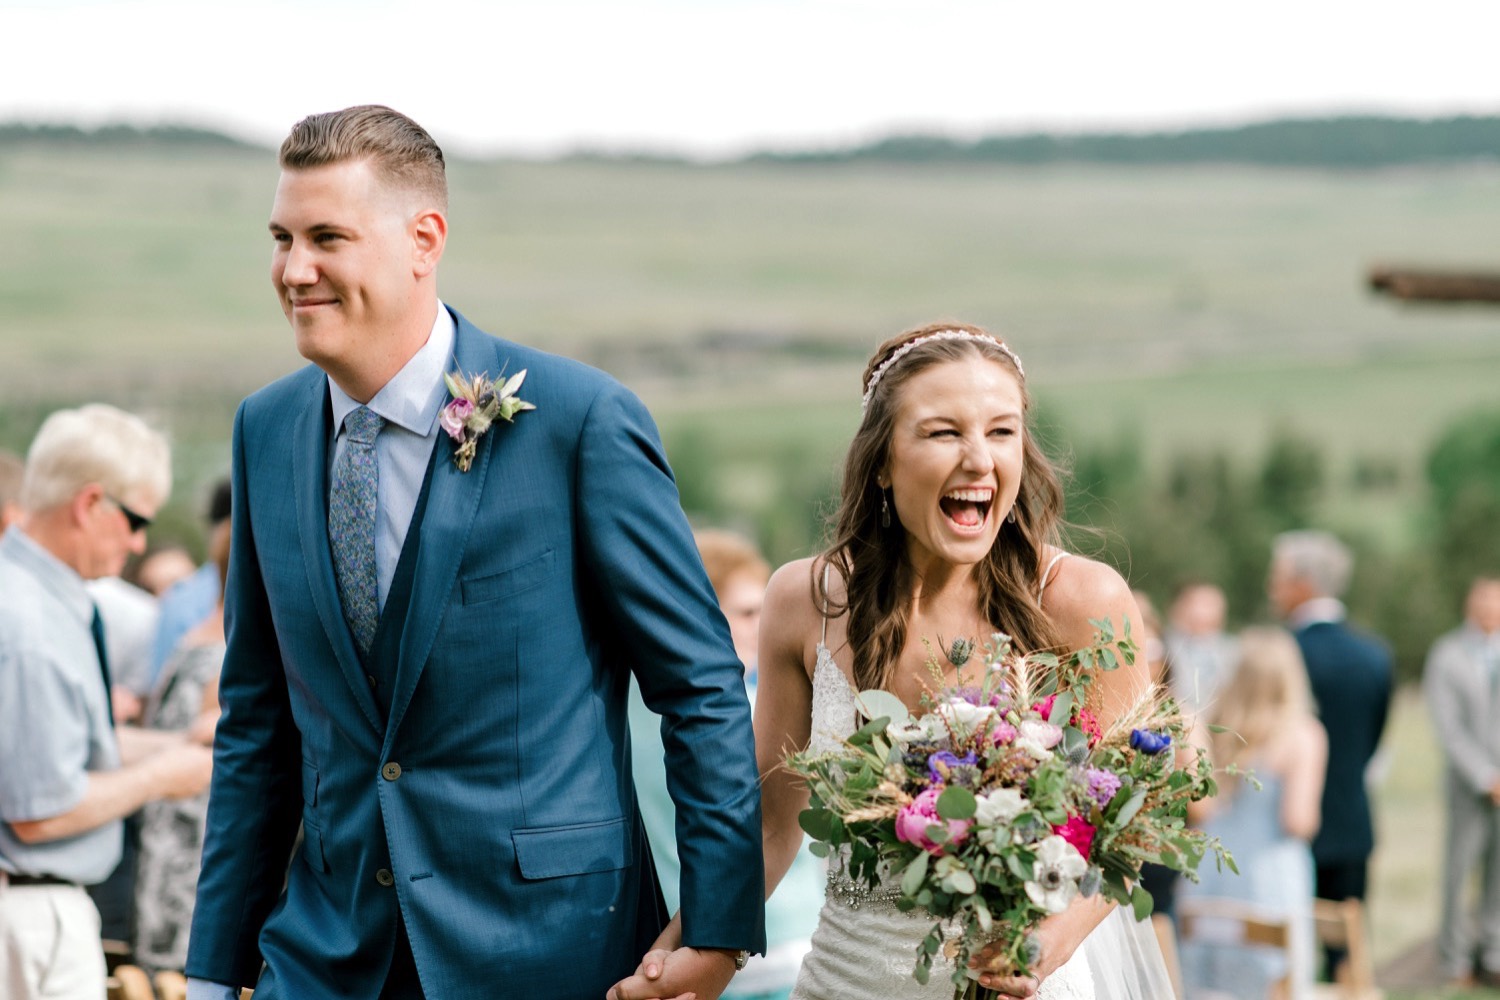 Kristen and Charlton cheer as they're married and walk down the aisle for their recessional at Spruce Mountain Ranch in Larkspur, Colorado.